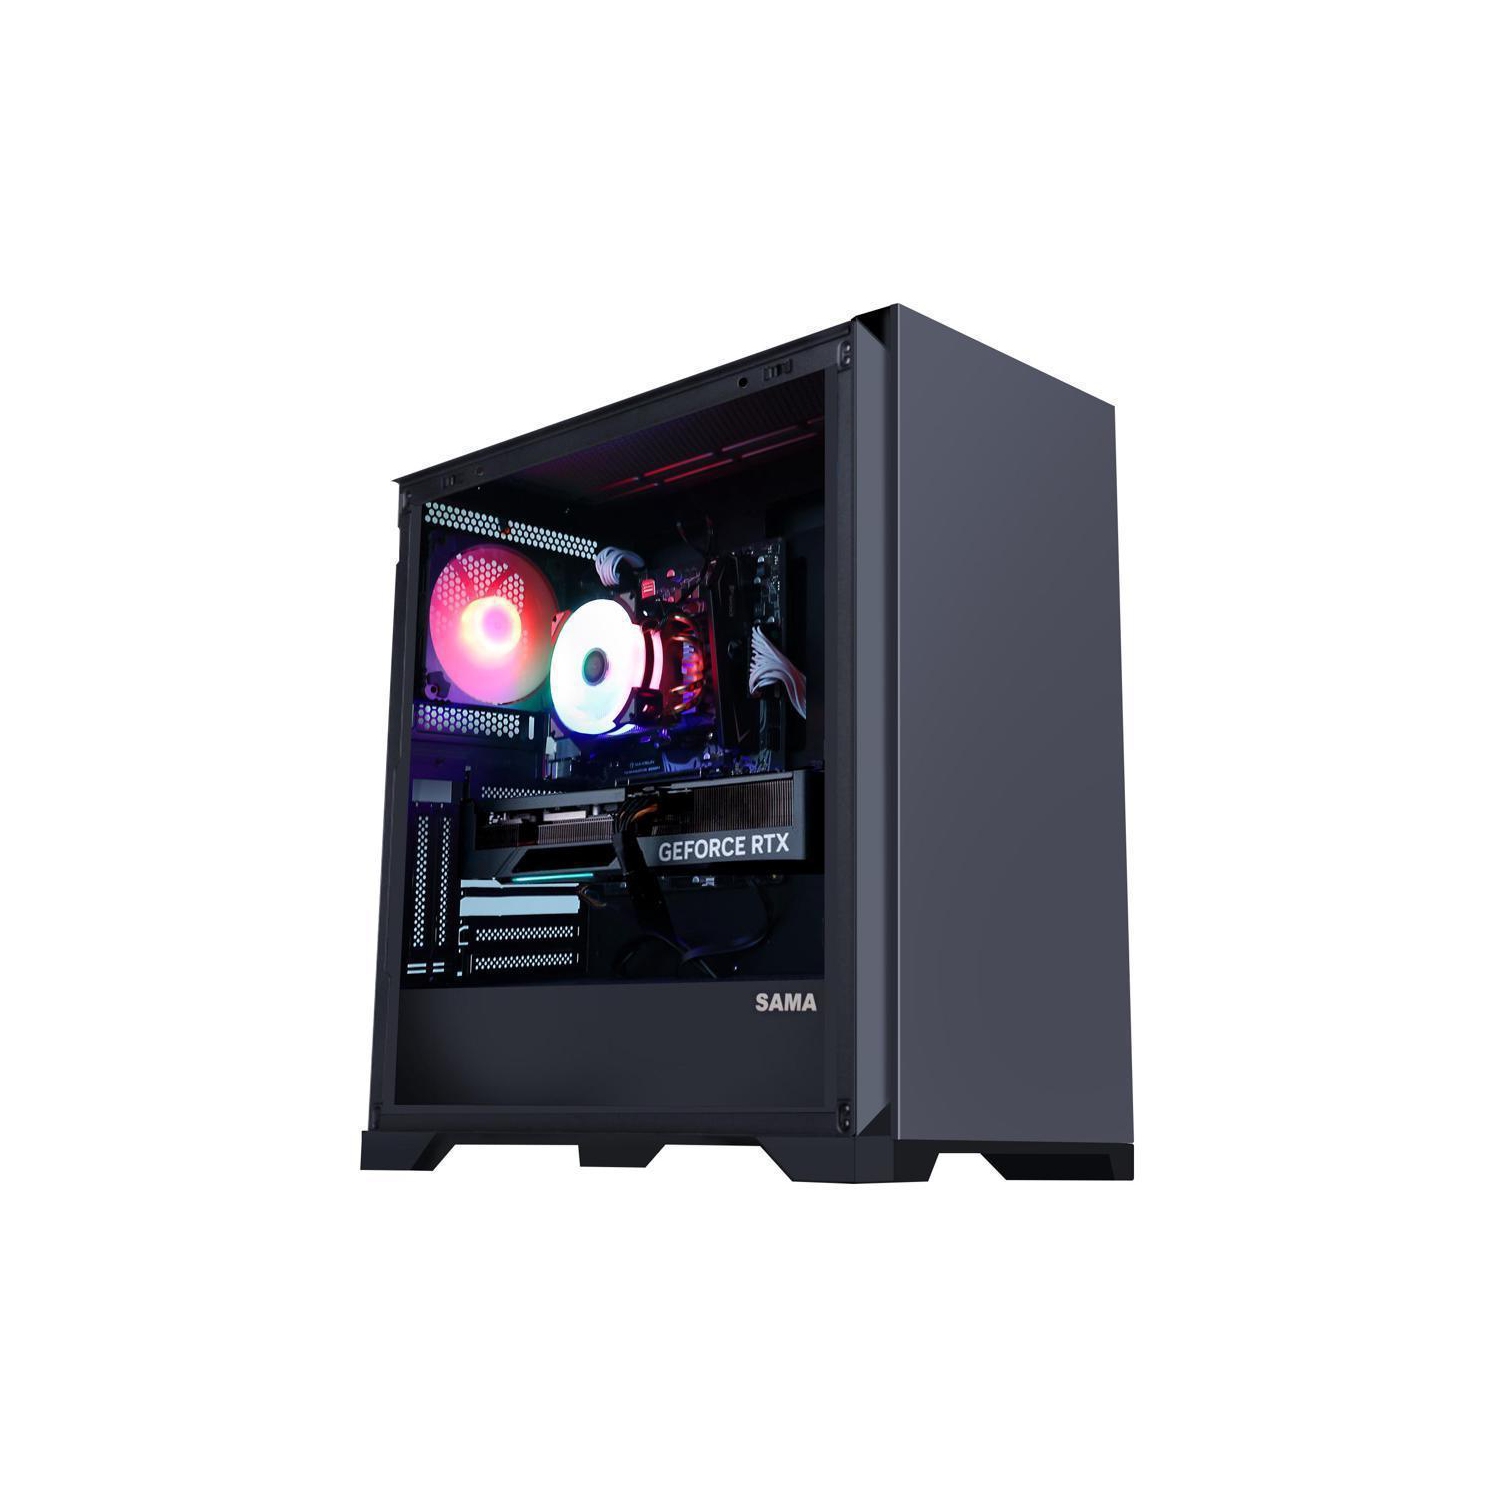 Hoengager Ares Gaming - Intel Core i5-12600K 10-Core 3.7GHz-NVIDIA GeForce RTX 3060 Ti- 32GB DDR4 3200MHz -500GB M.2 + 1TB 2.5'' SATA SSD- WIFI -RGB Fans - Windows 11 Pro Computer